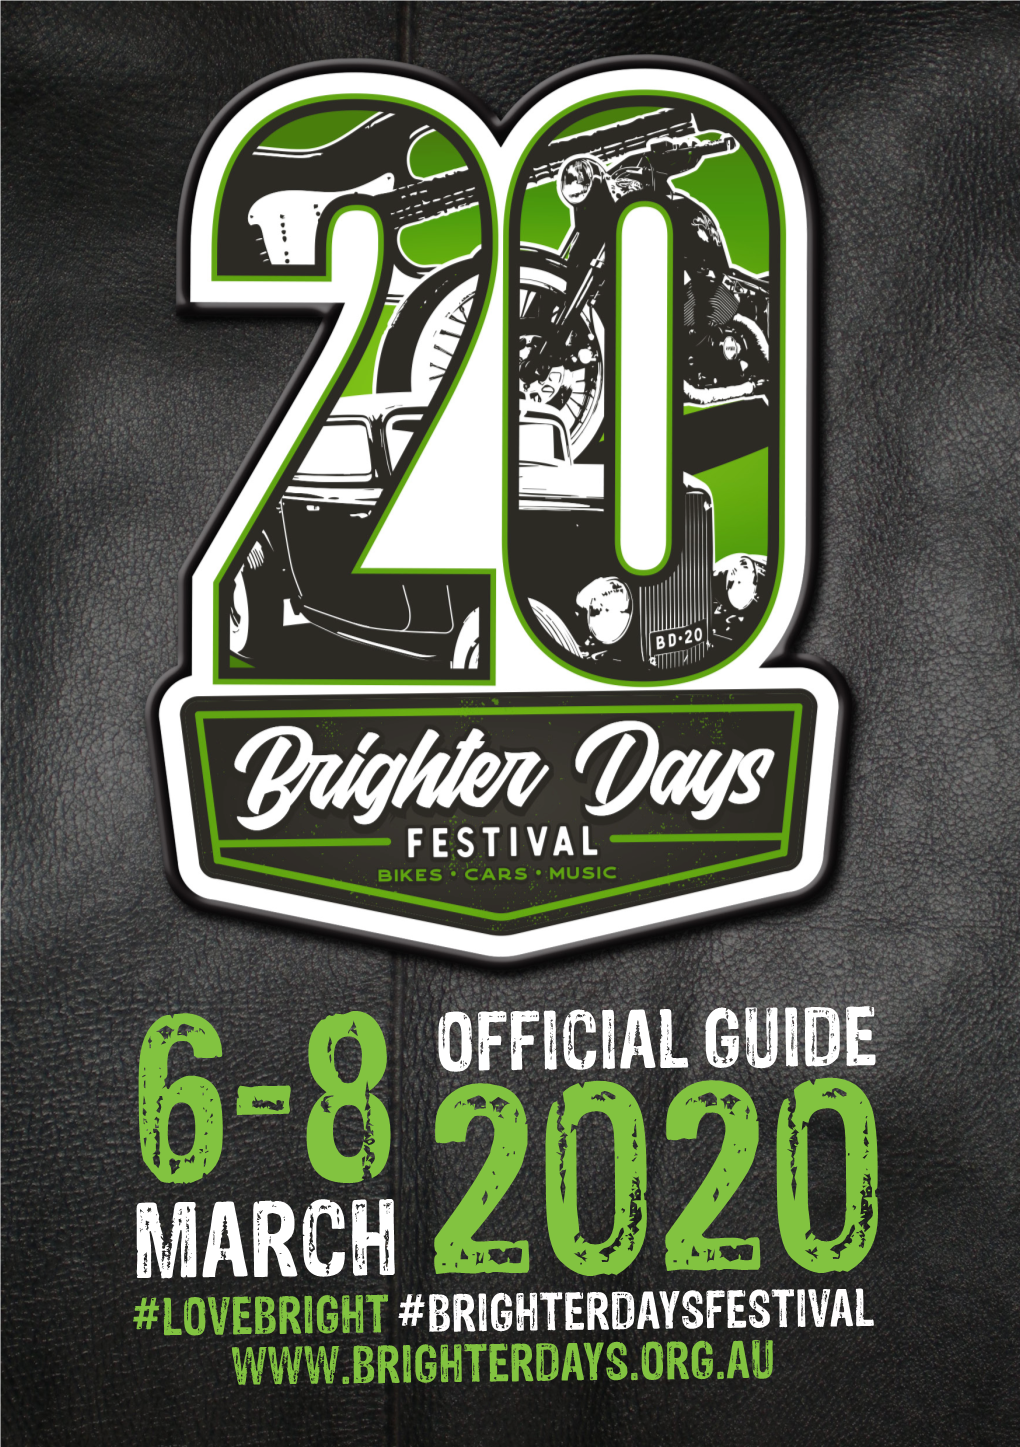 Official Guide March 2020 #Lovebright #Brighterdaysfestival Brighter Days Foundation Committee